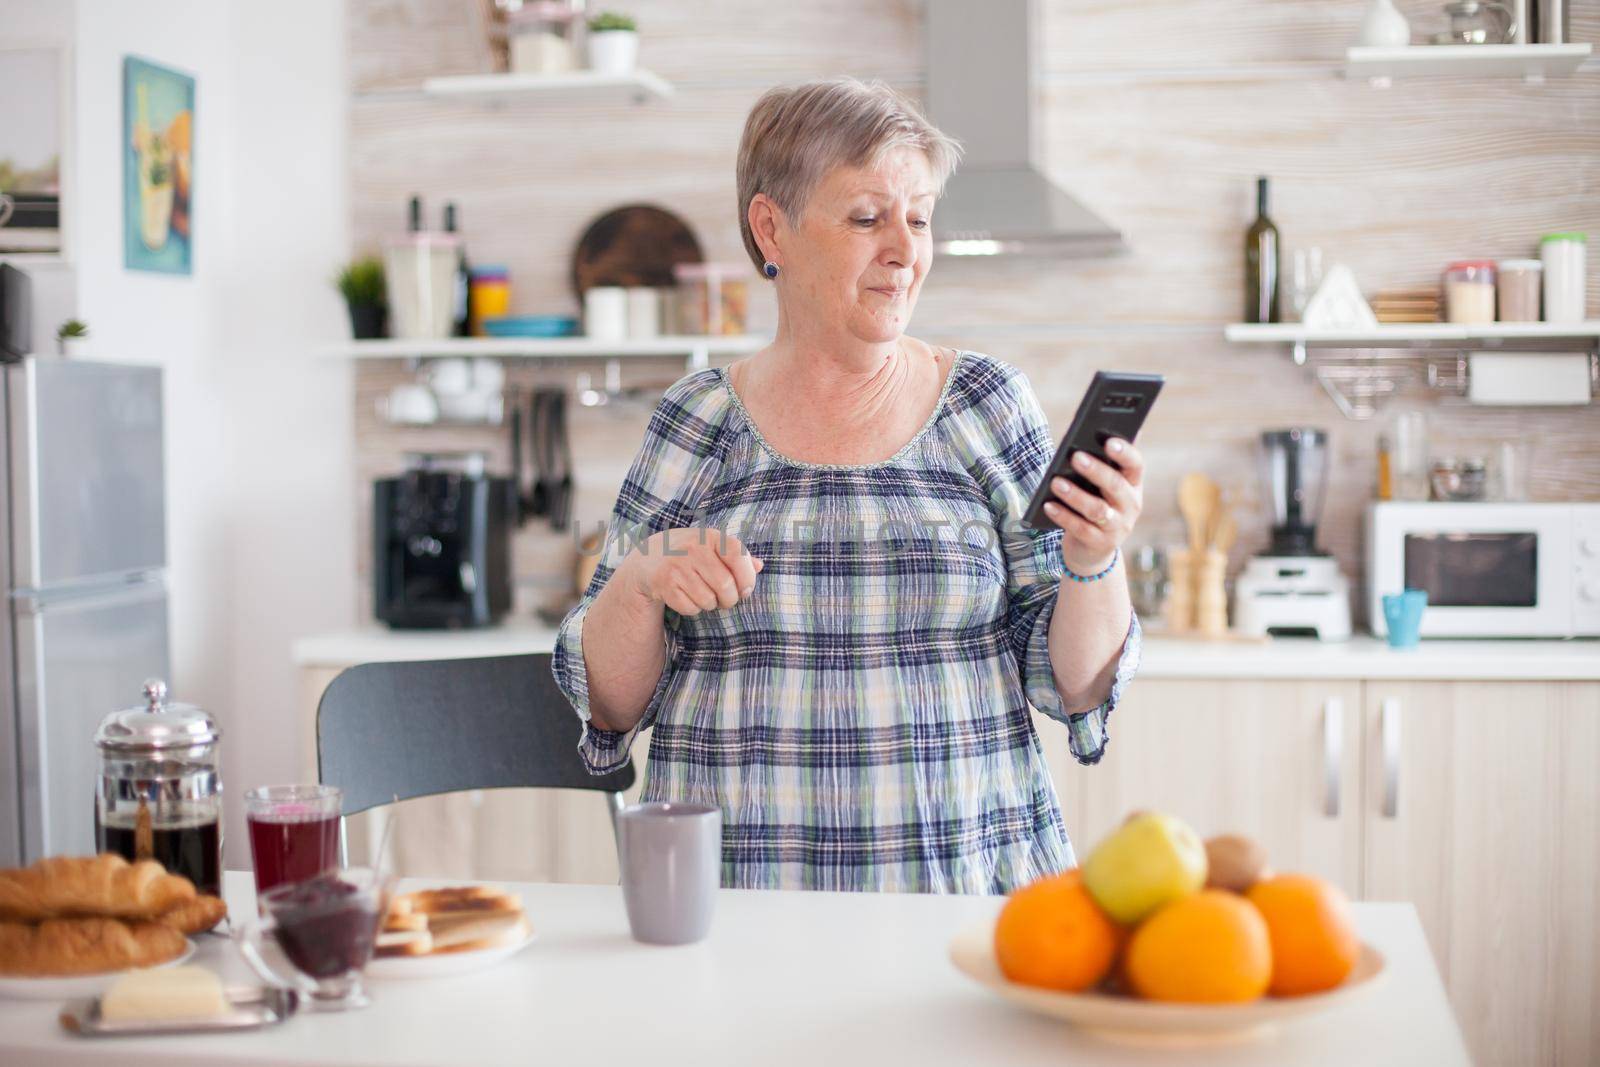 Old woman enjoying music from smartphone during breakfast in kitchen holding cup of coffee. Relaxed elderly dancing, fun lifestyle with modern technology